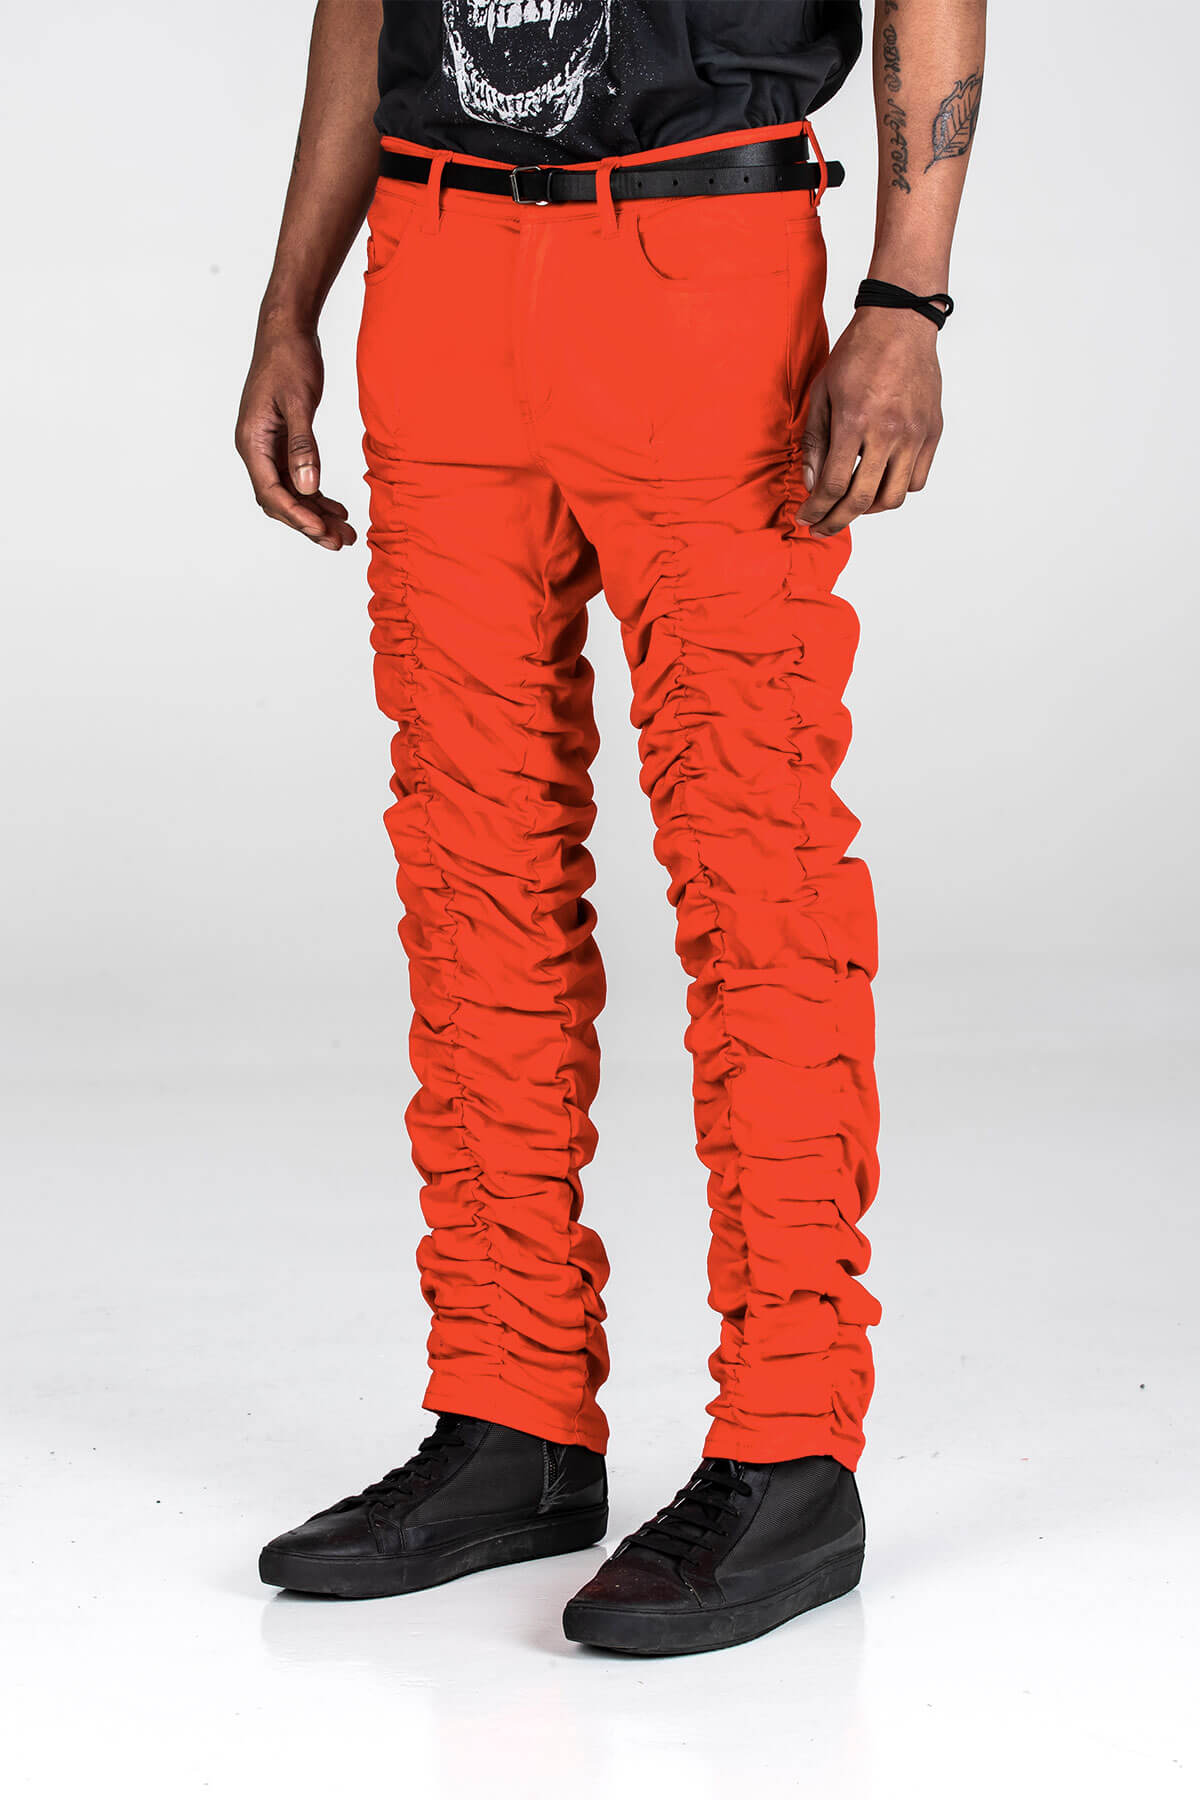 RED STACK PANTS - BOTTOM - A/W 2020 - MJB